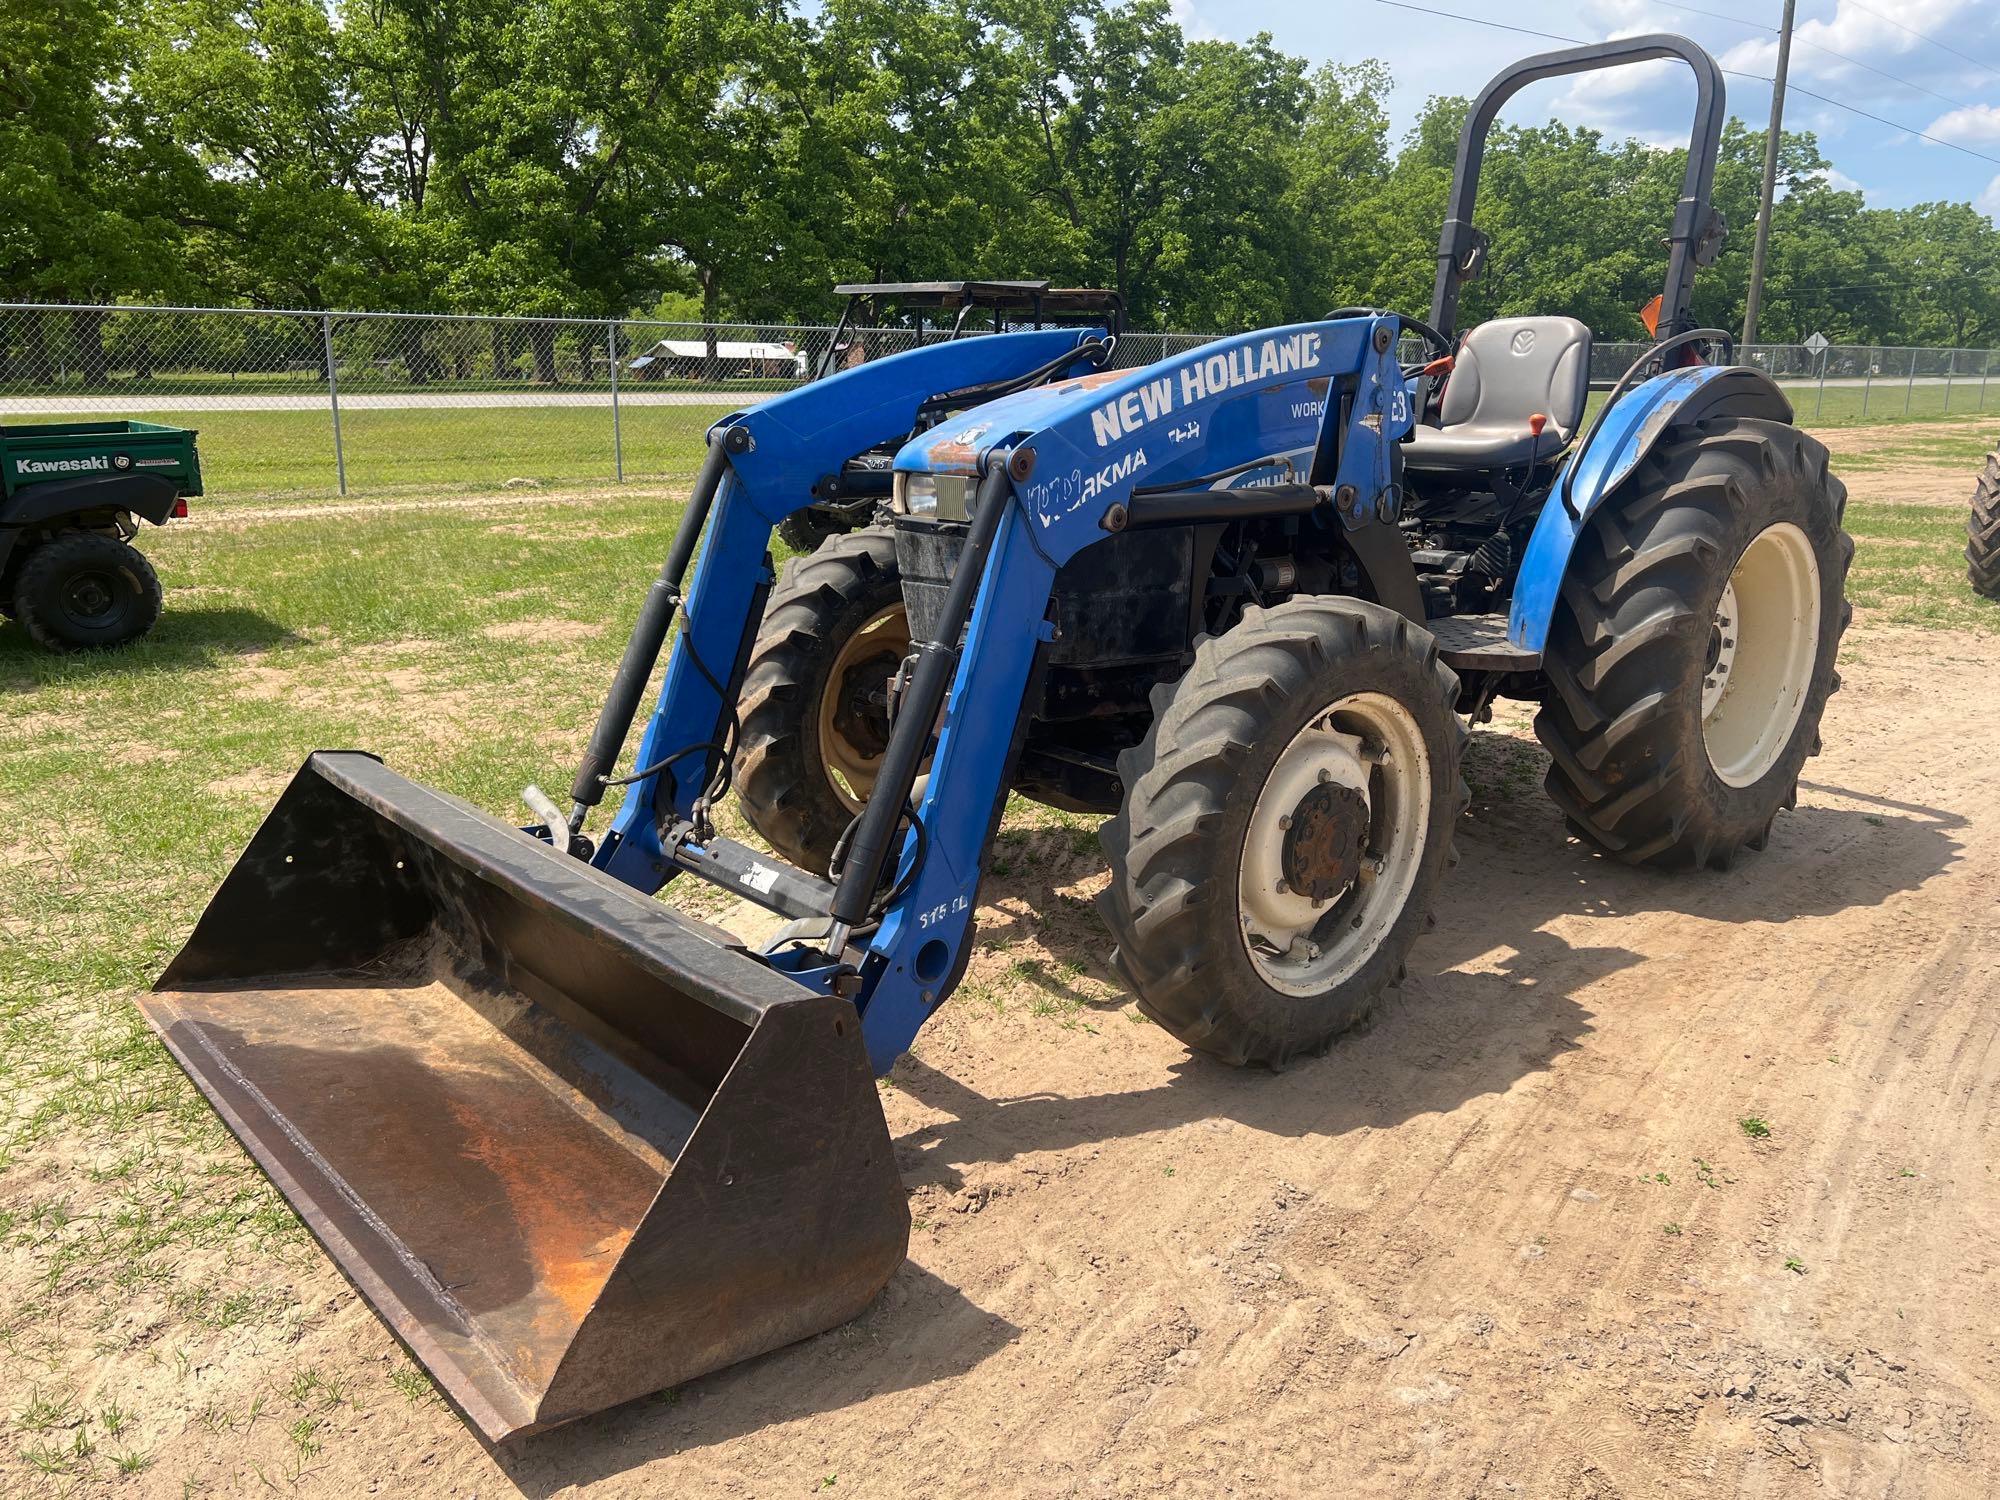 2012 NEW HOLLAND WORK MASTER 55 TRACTOR